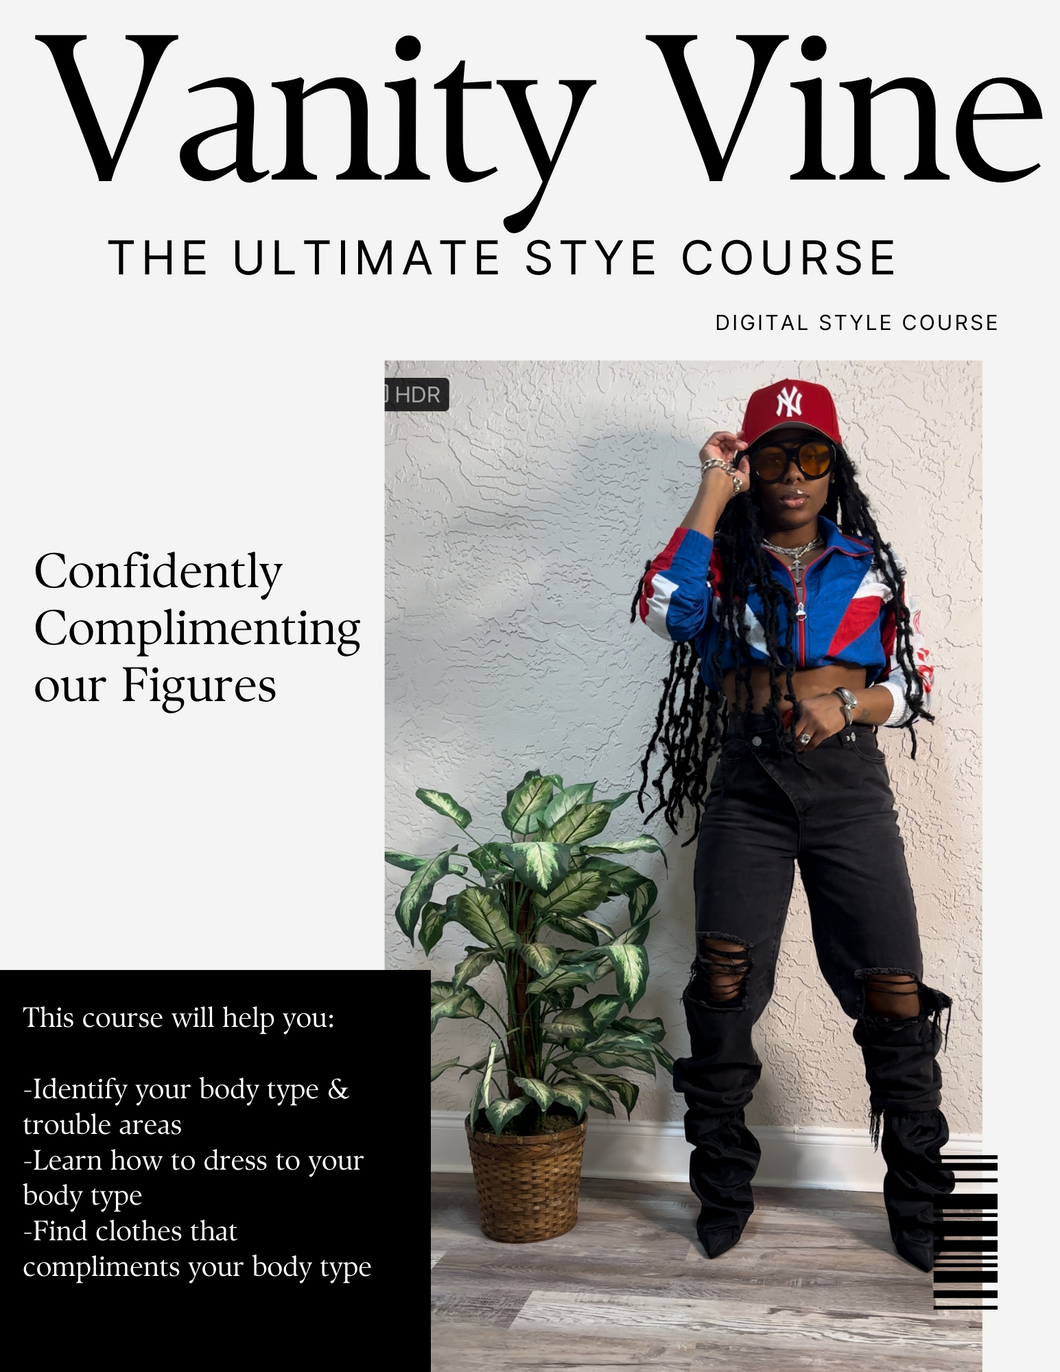 The Ultimate Style Course